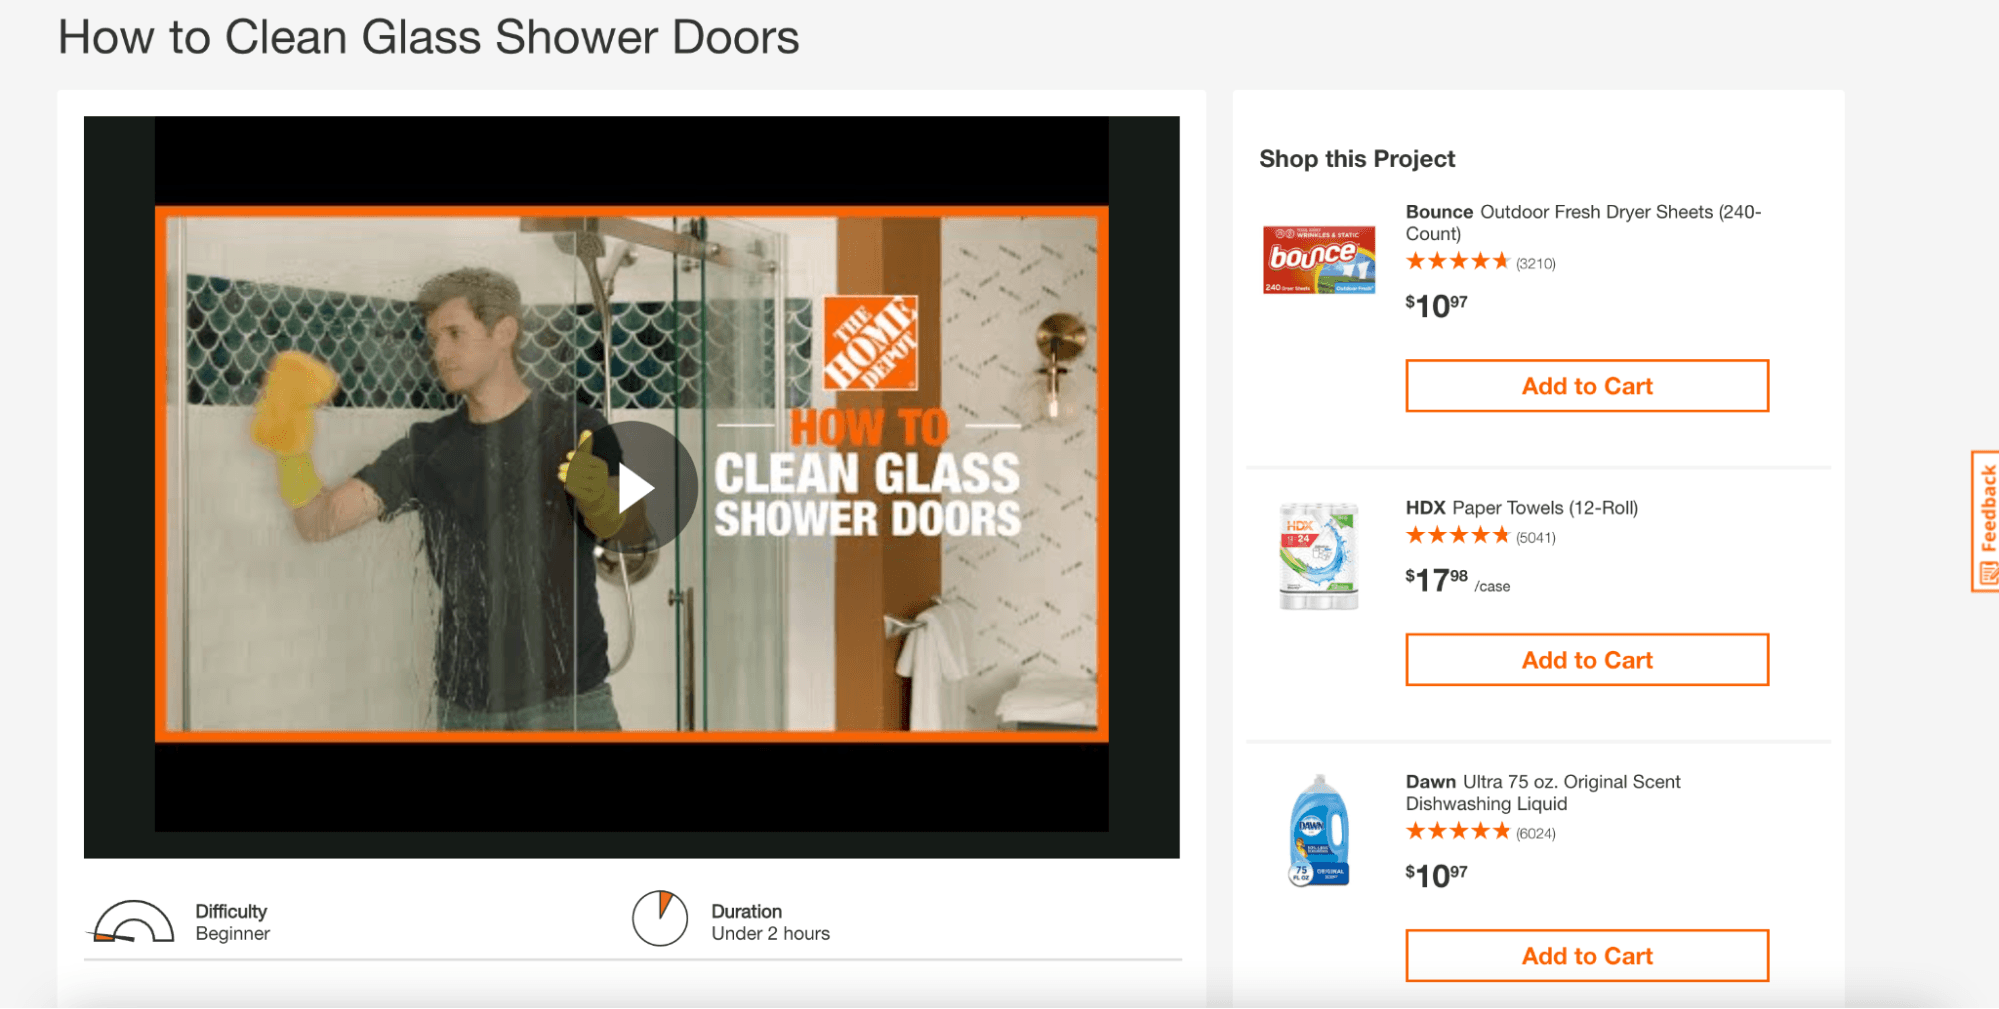 Example of a Home Depot blog video tutorial